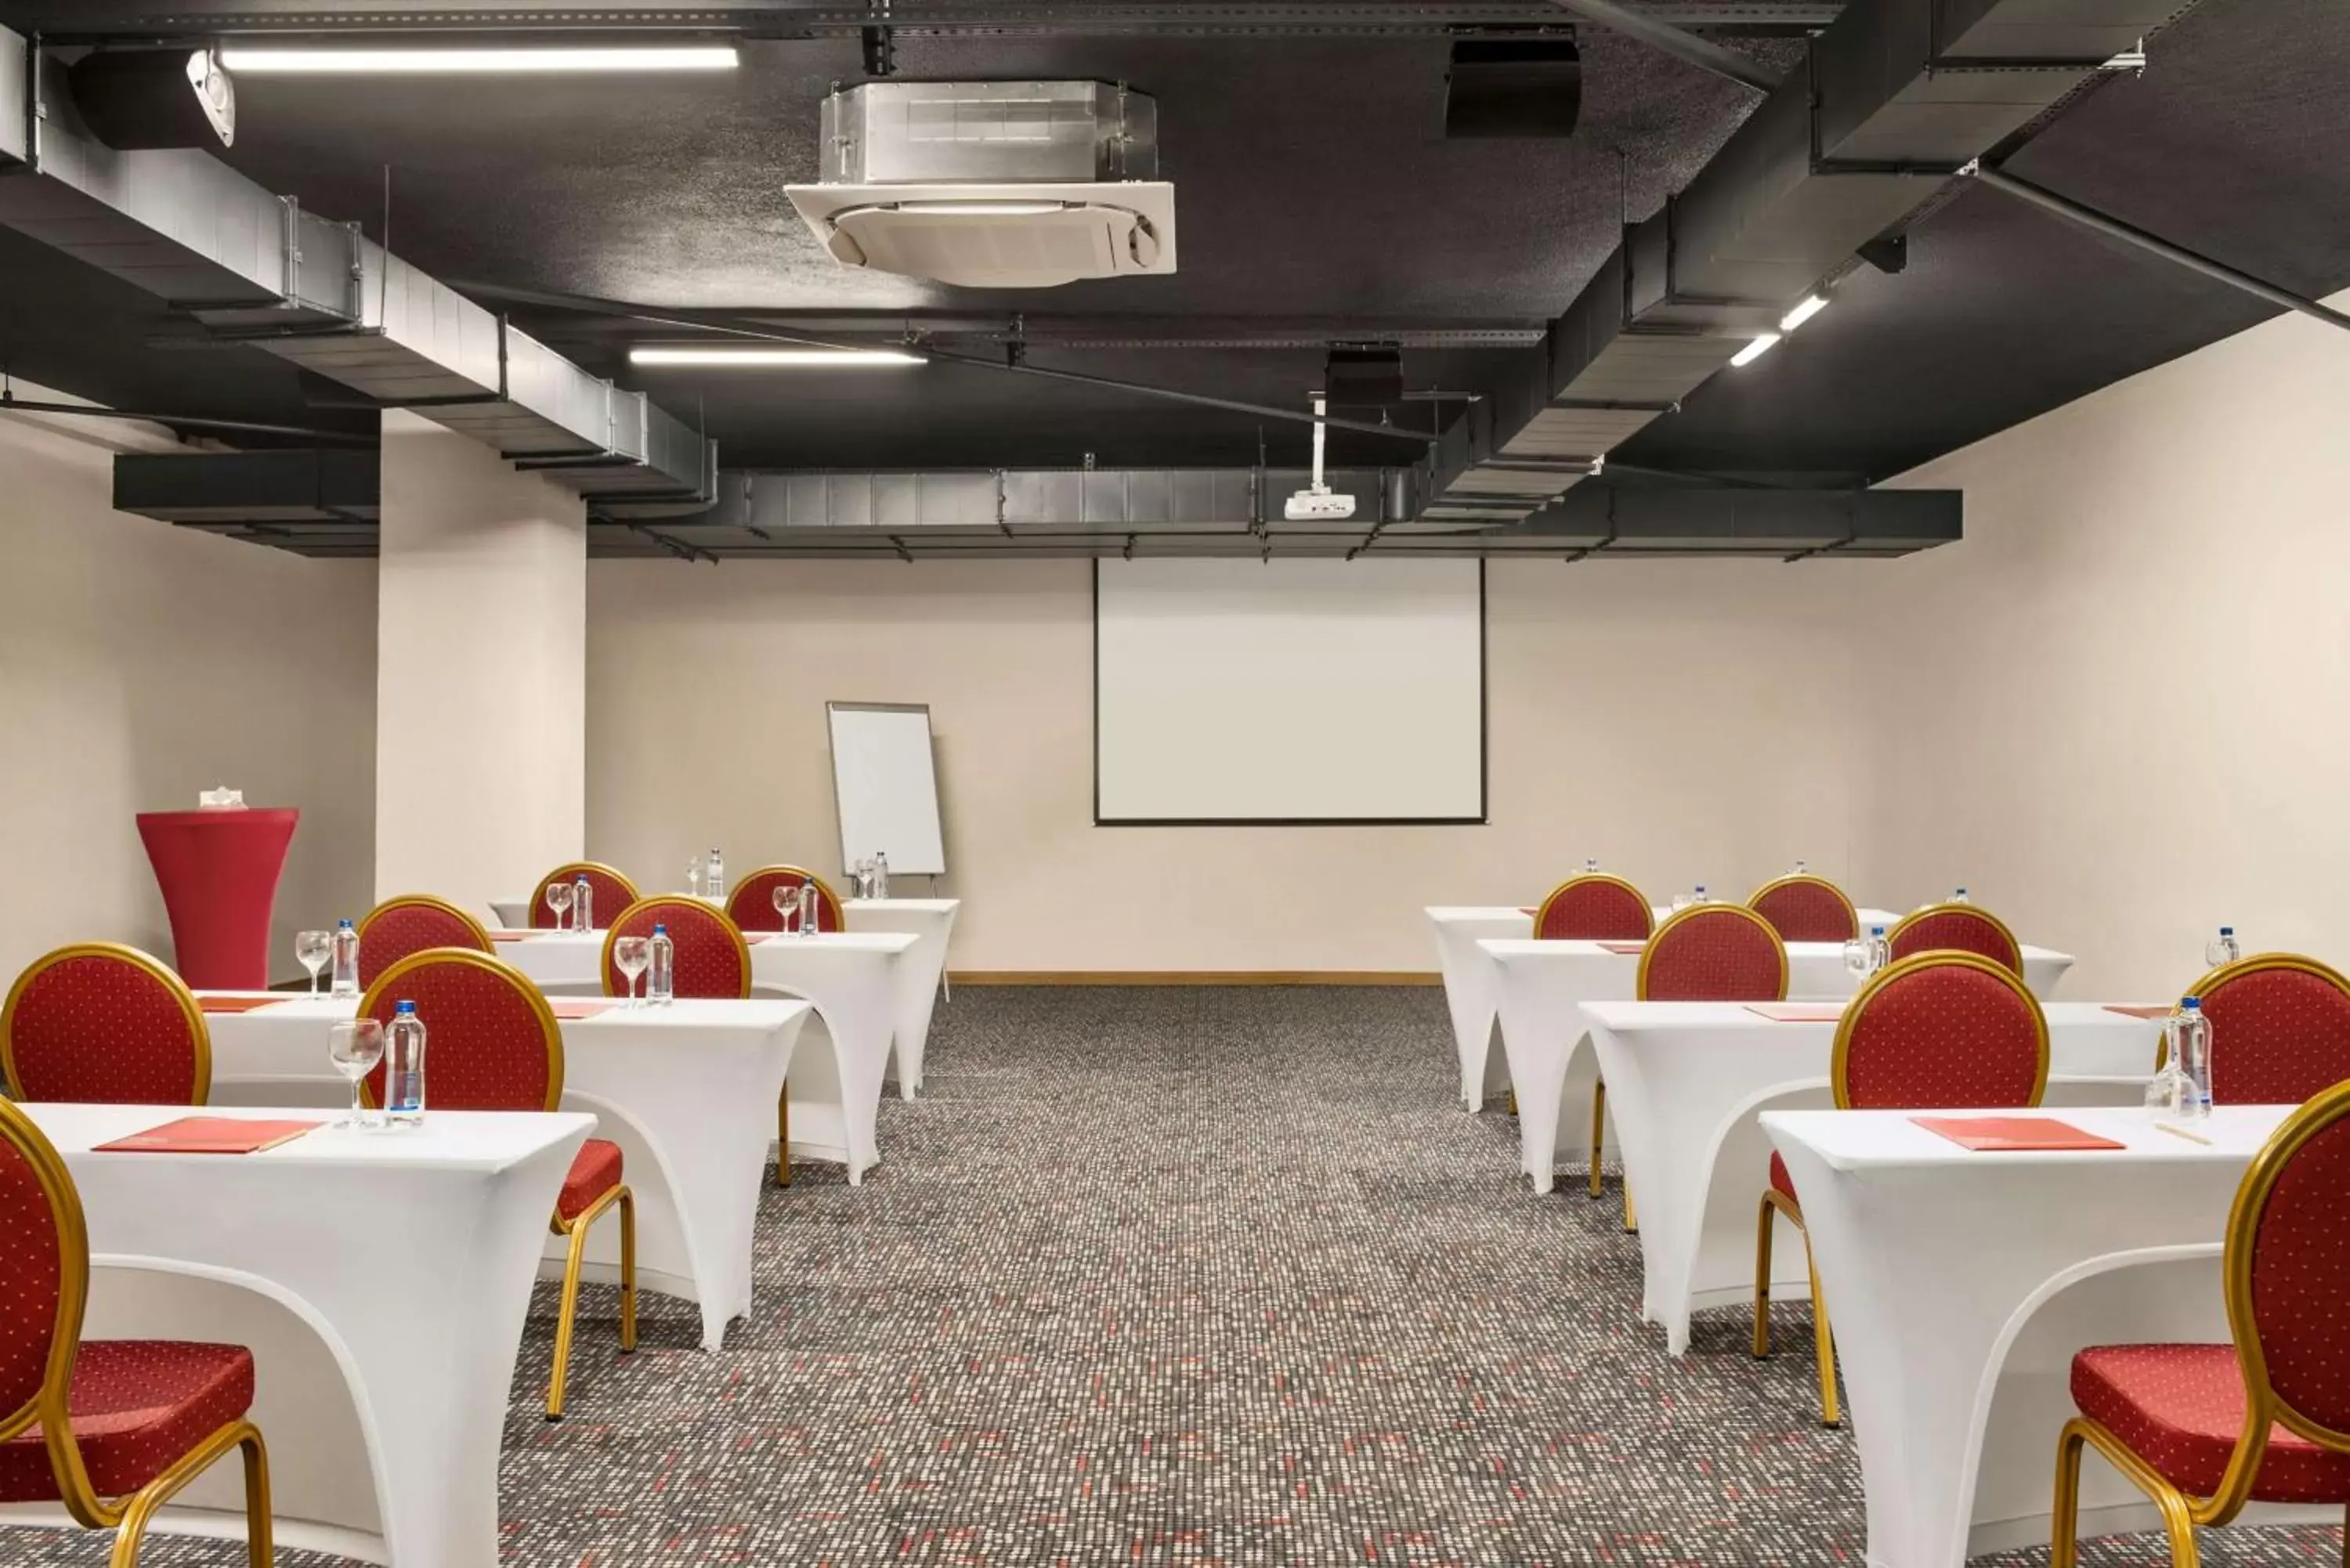 Meeting/conference room in Ramada Plaza by Wyndham Ordu